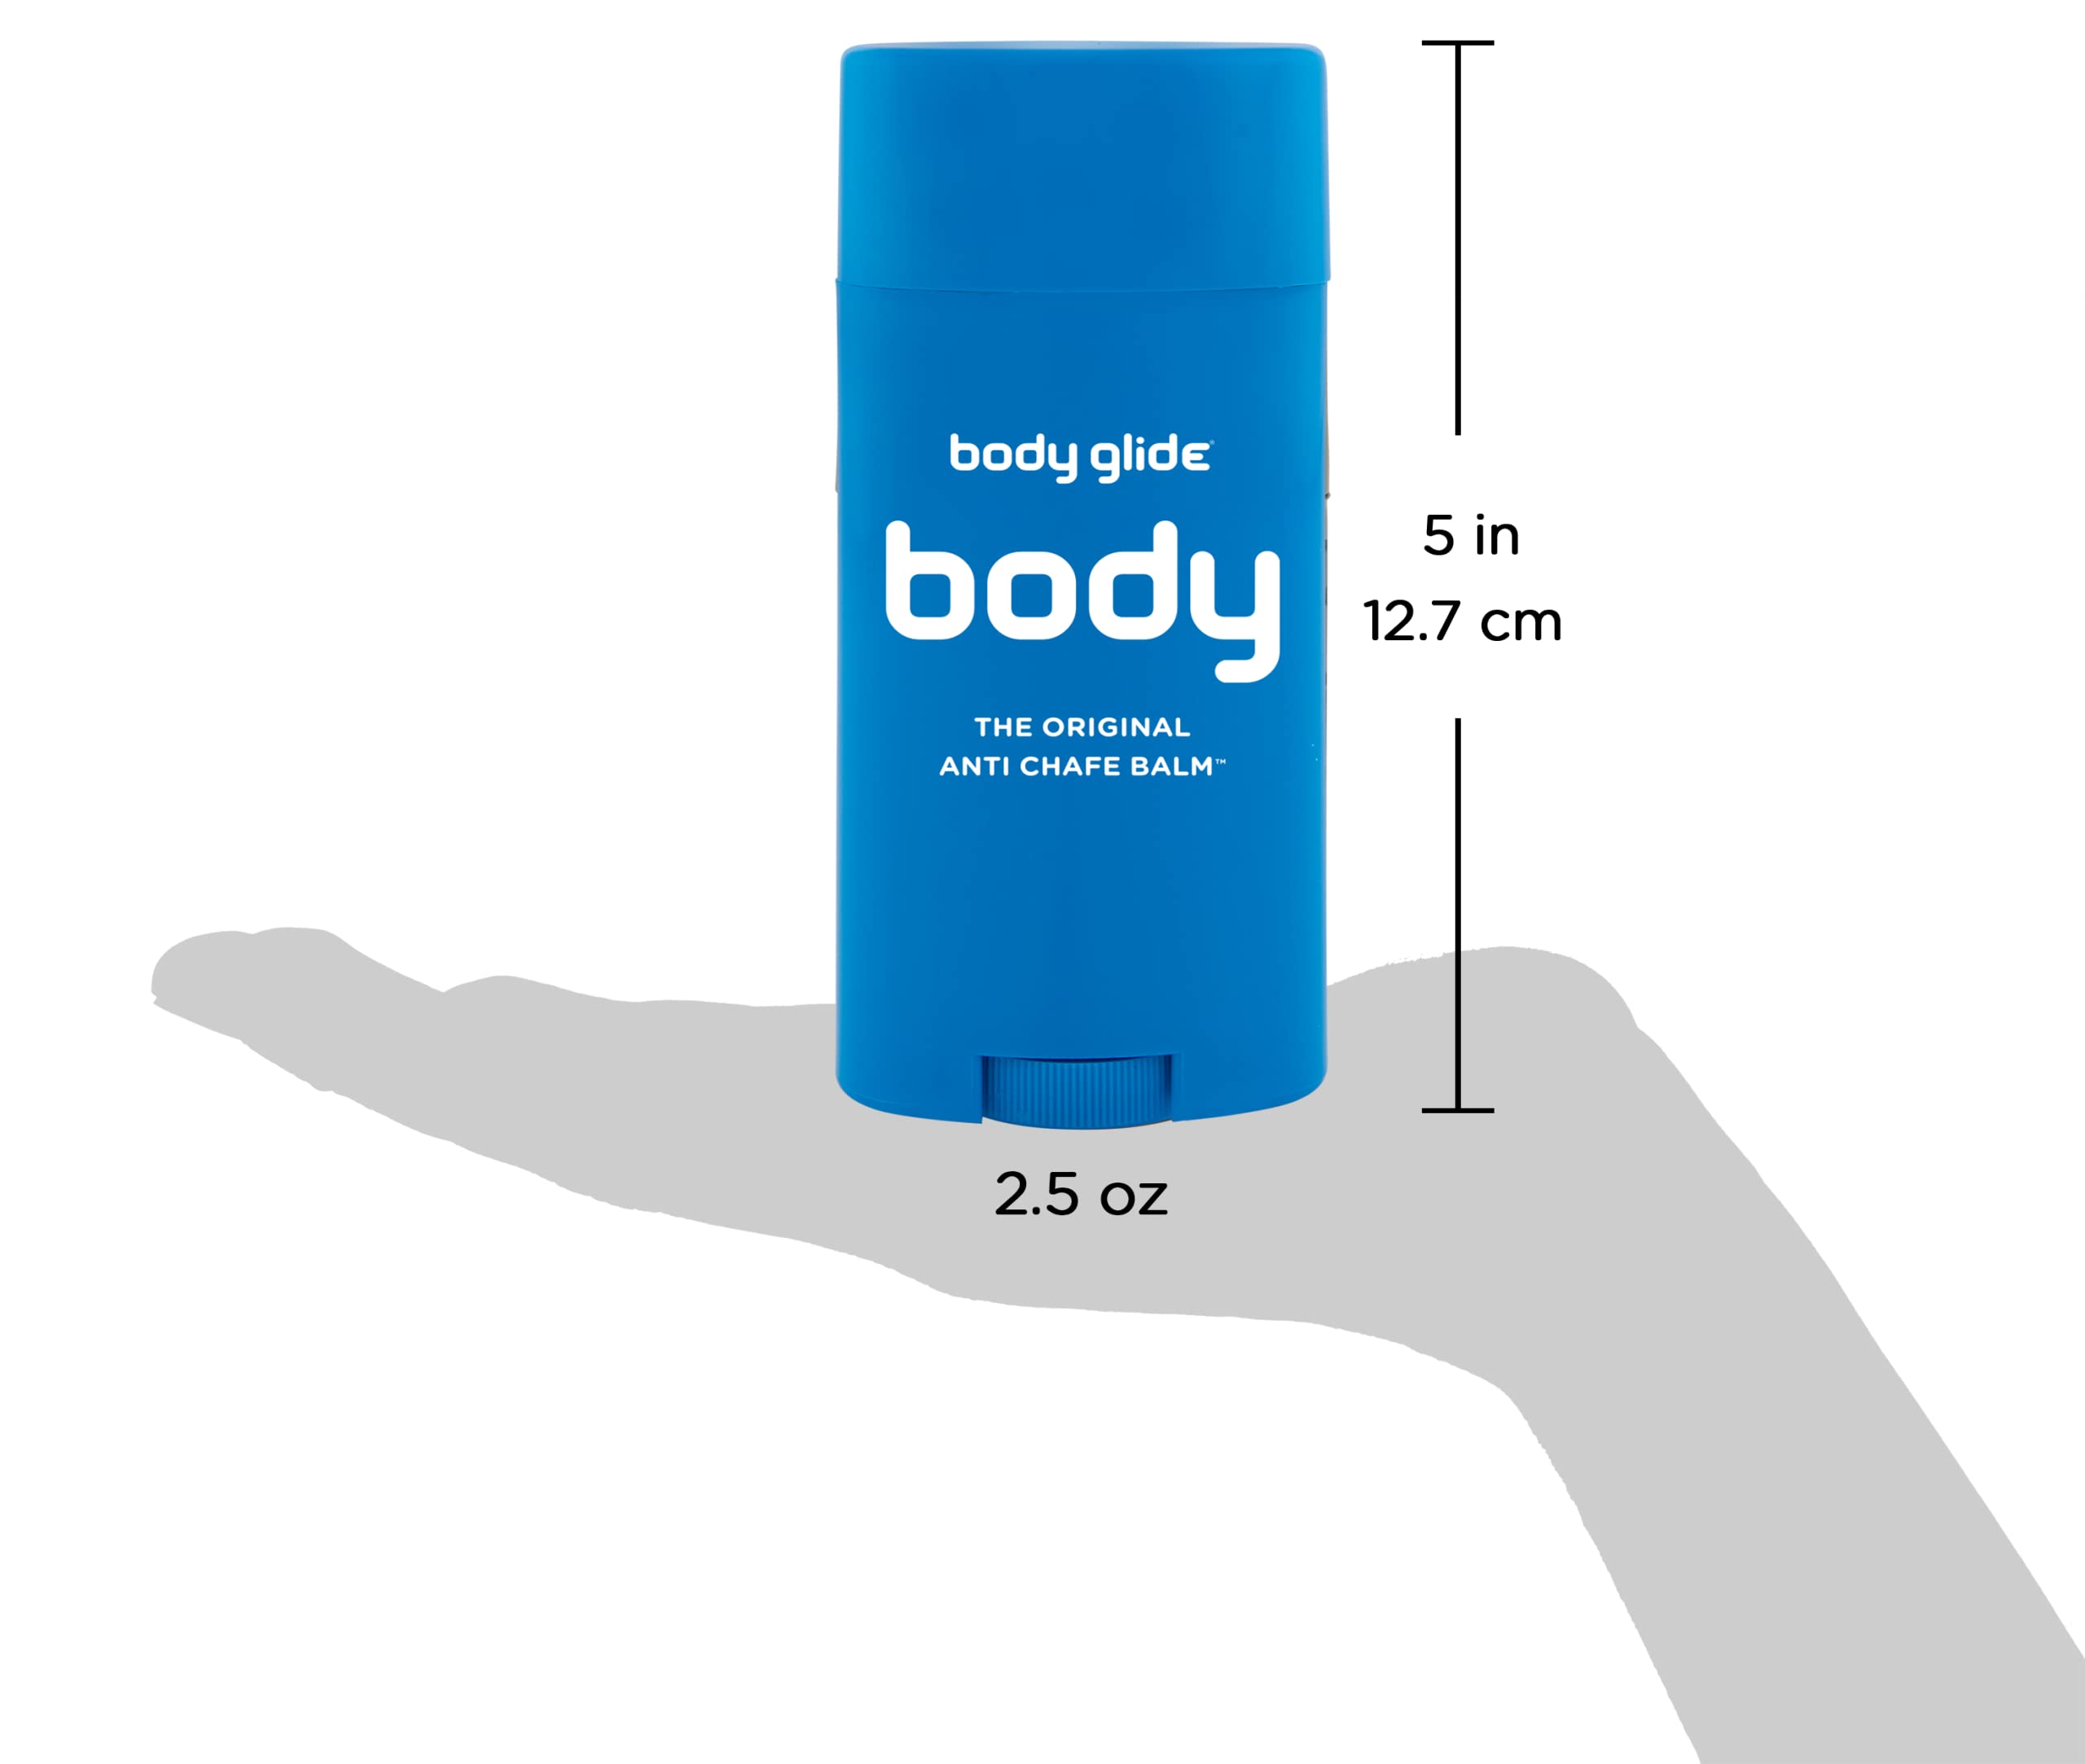 body glide Original Anti-Chafe Balm, 2.5oz & Foot Glide Anti Blister Balm, 0.8oz: Blister Prevention for Shoes, Cleats, Sandals, Boots, high Heels, Cleats, Socks, and Sandals.